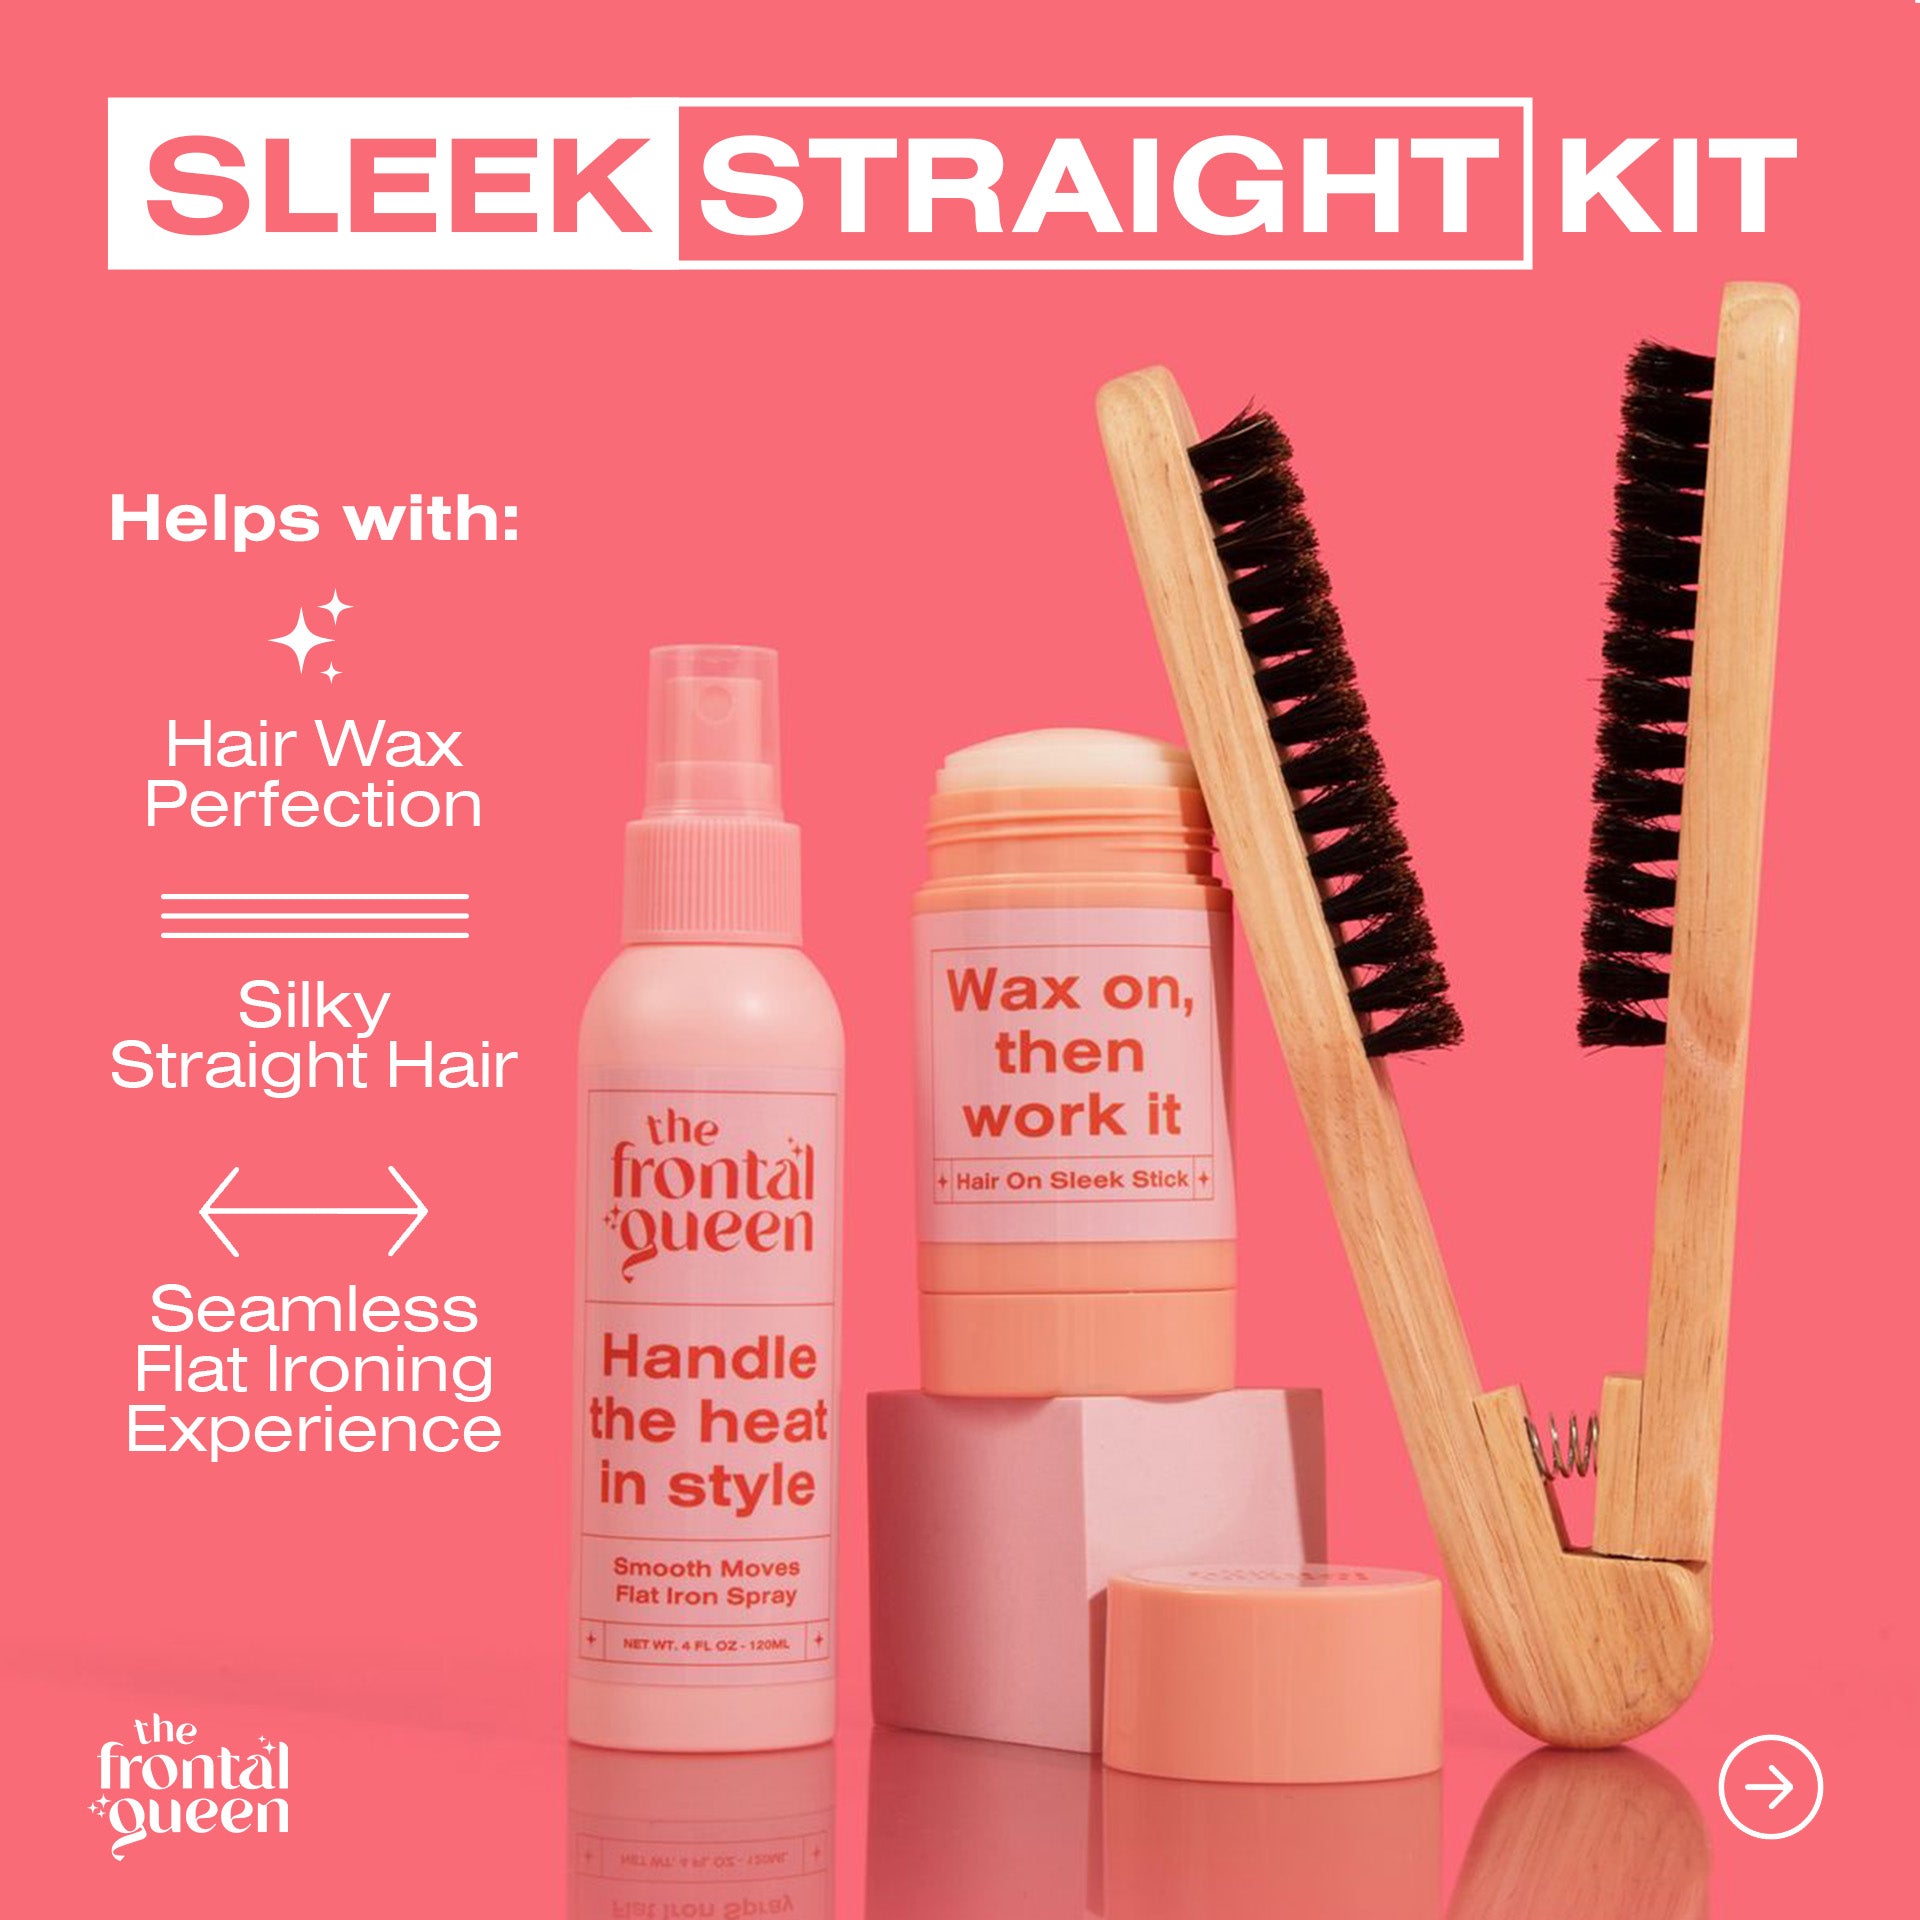 Sleek Straight Kit - The Frontal Queen